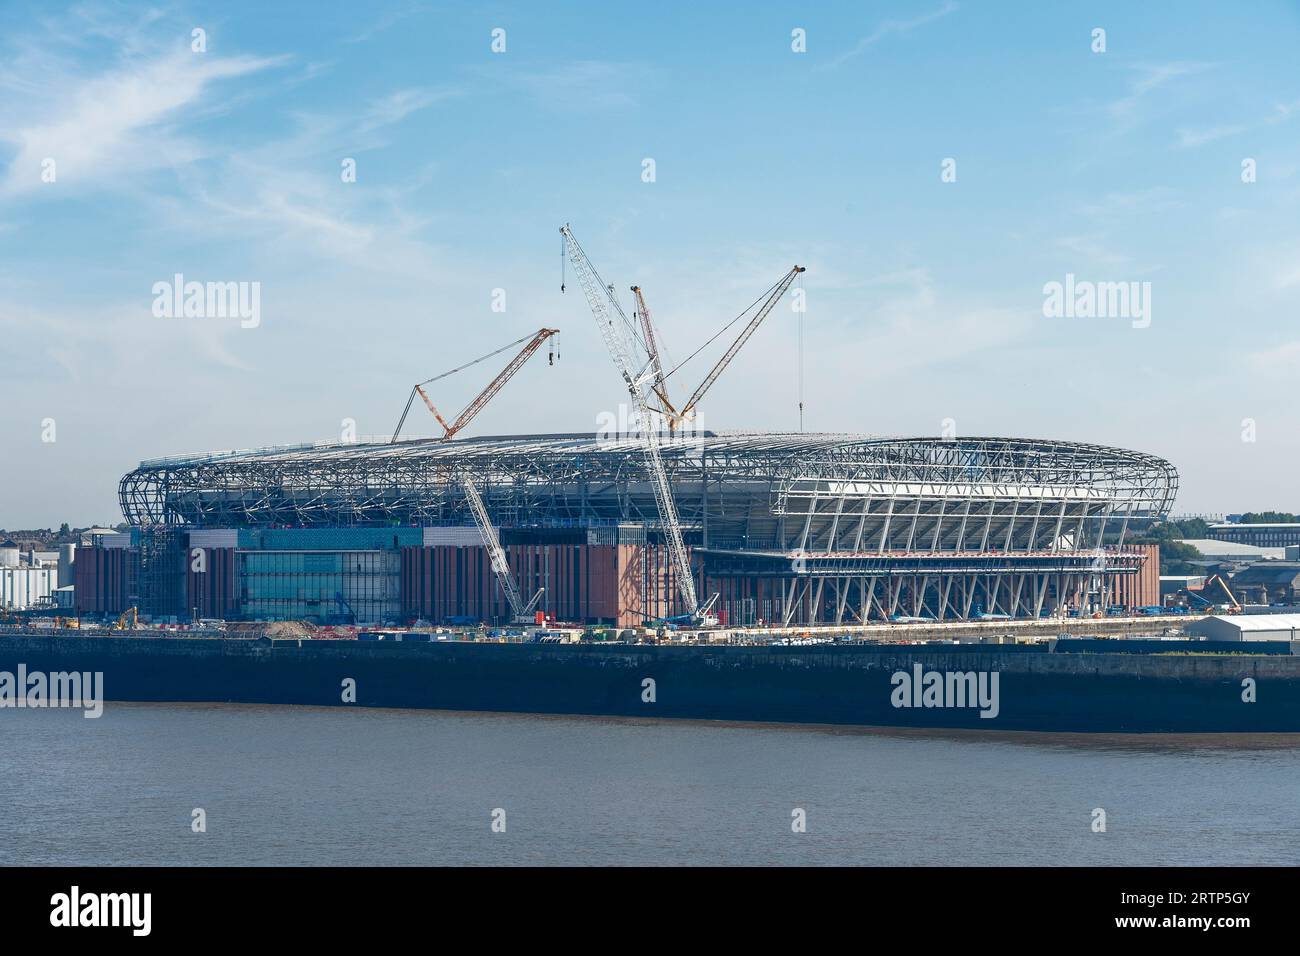 The new stadium for Everton Football Club under construction in Liverpool with Goodison Park in the background Stock Photo